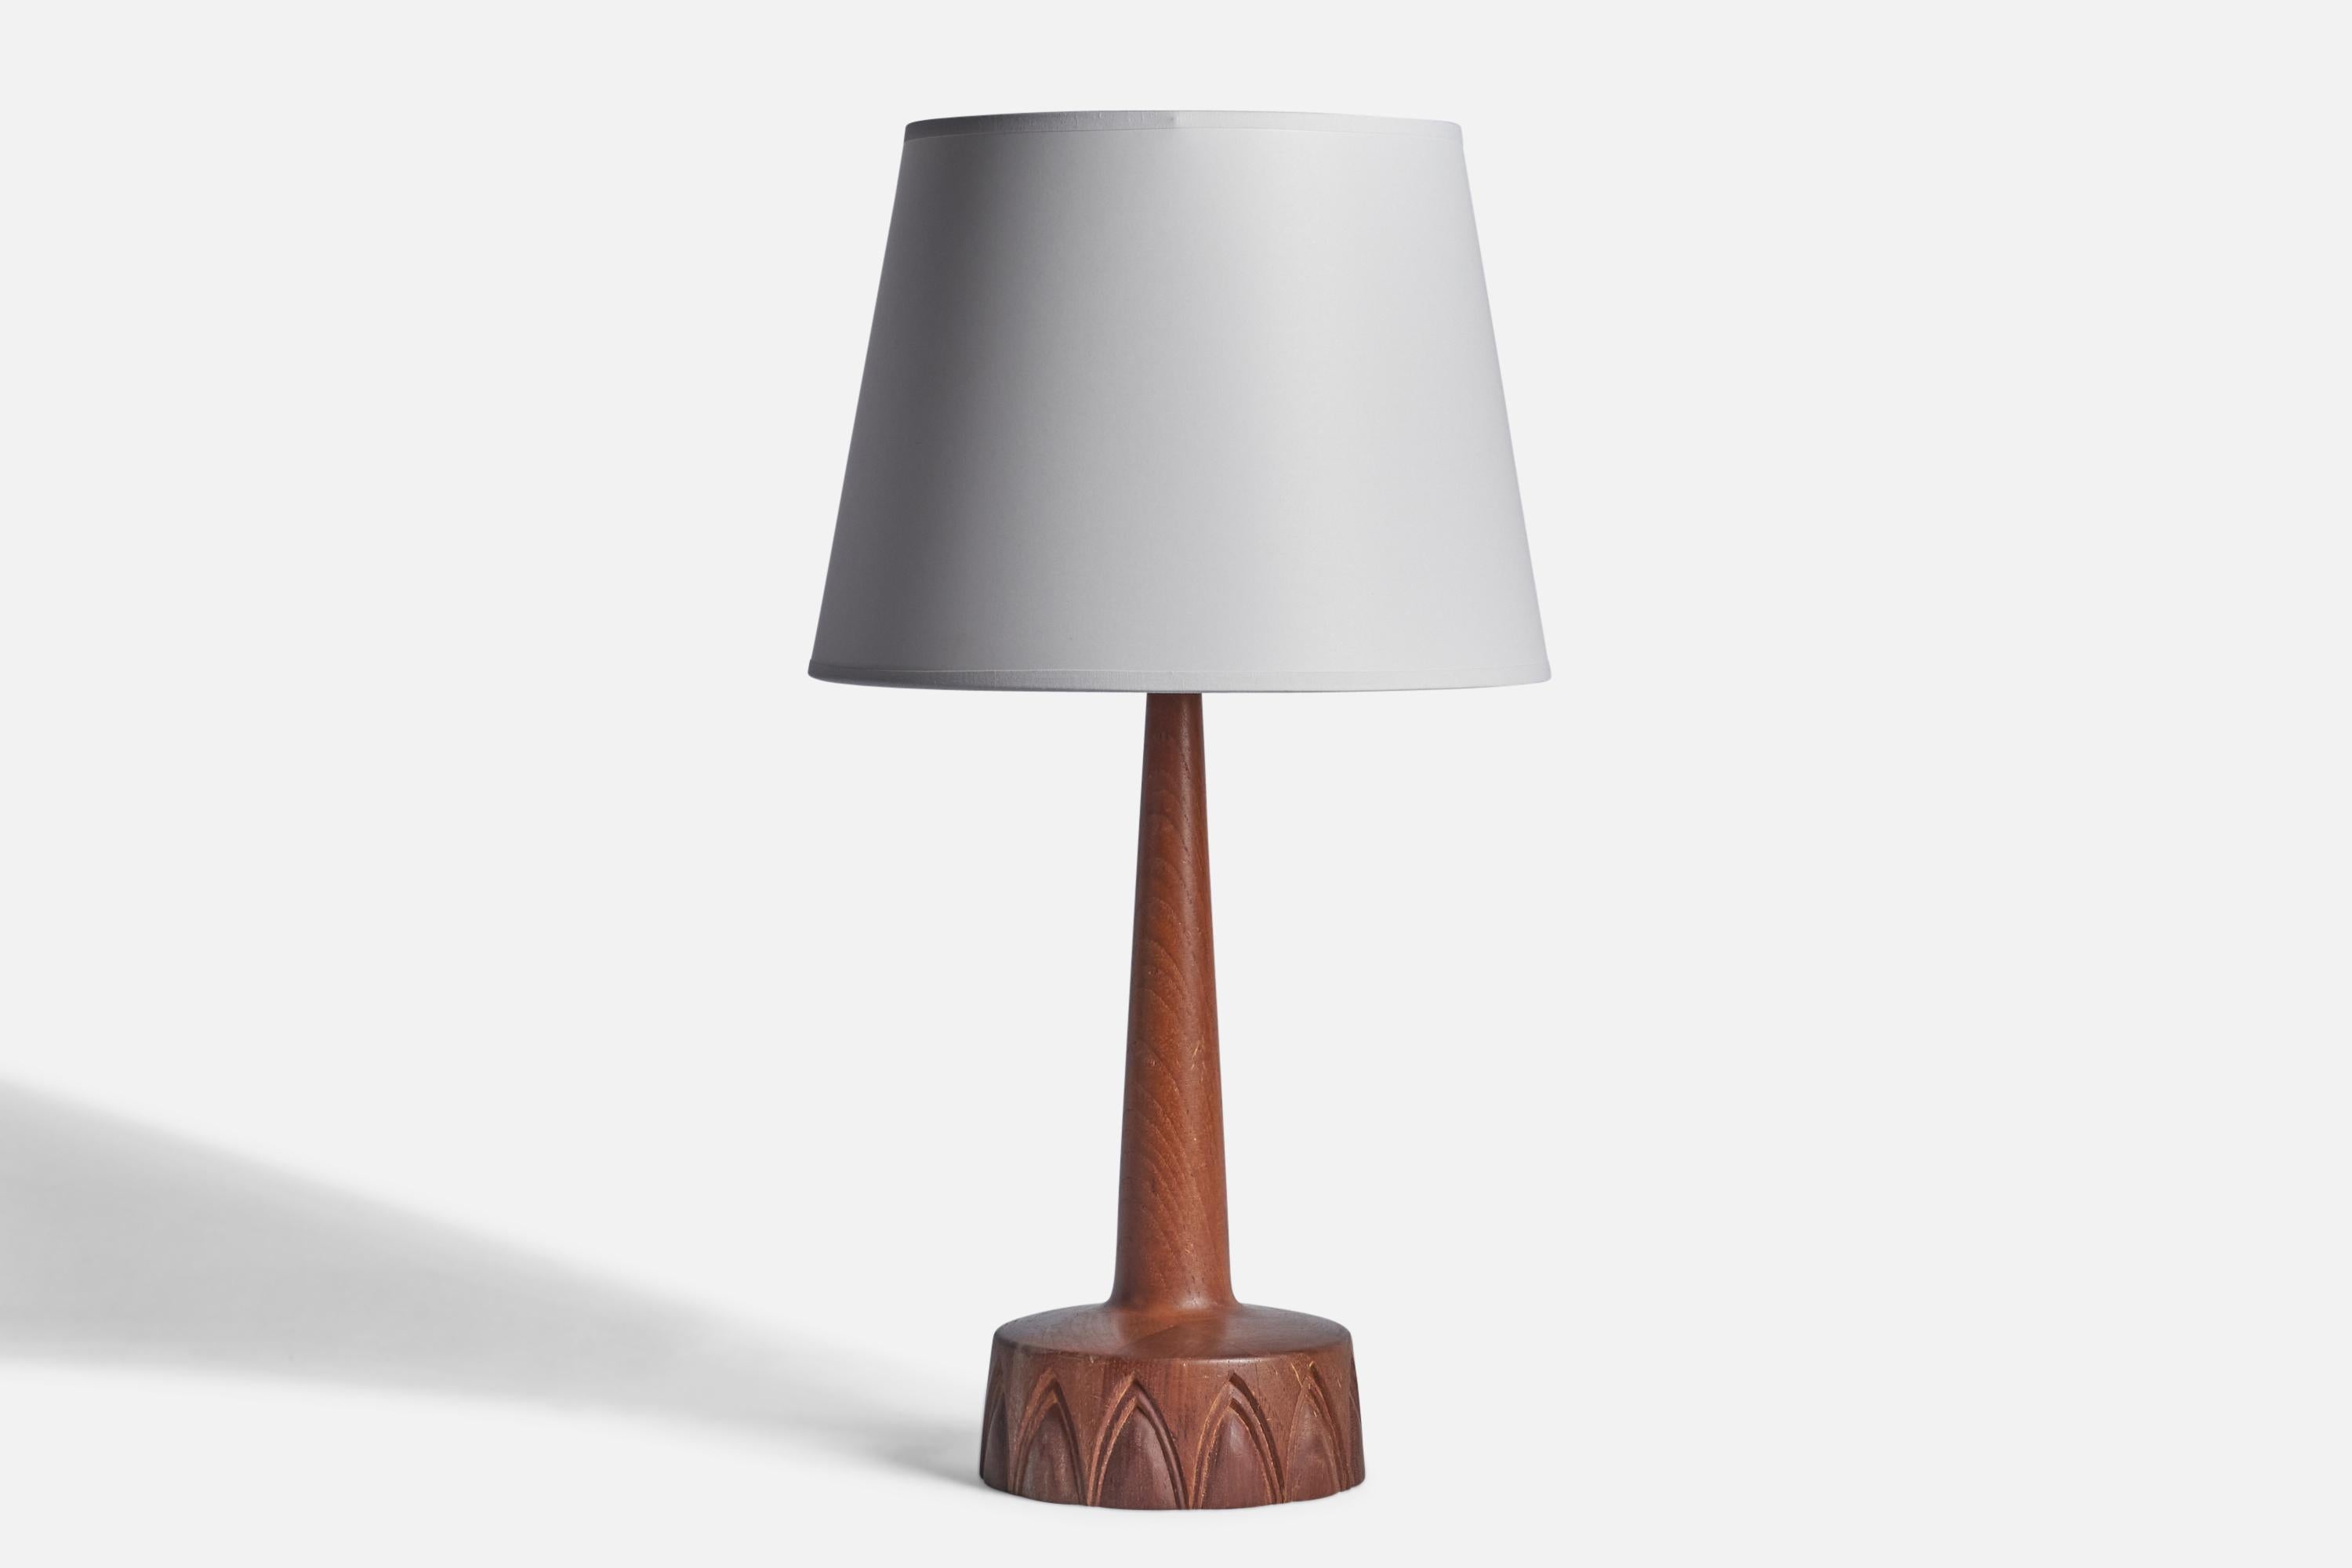 A teak table lamp designed and produced by Tranås Stilarmatur, Sweden, 1960s.

“523” stamp on bottom
Dimensions of Lamp (inches): 17” H x 6.25” Diameter
Dimensions of Shade (inches): 9” Top Diameter x 12” Bottom Diameter x 9” H 
Dimensions of Lamp